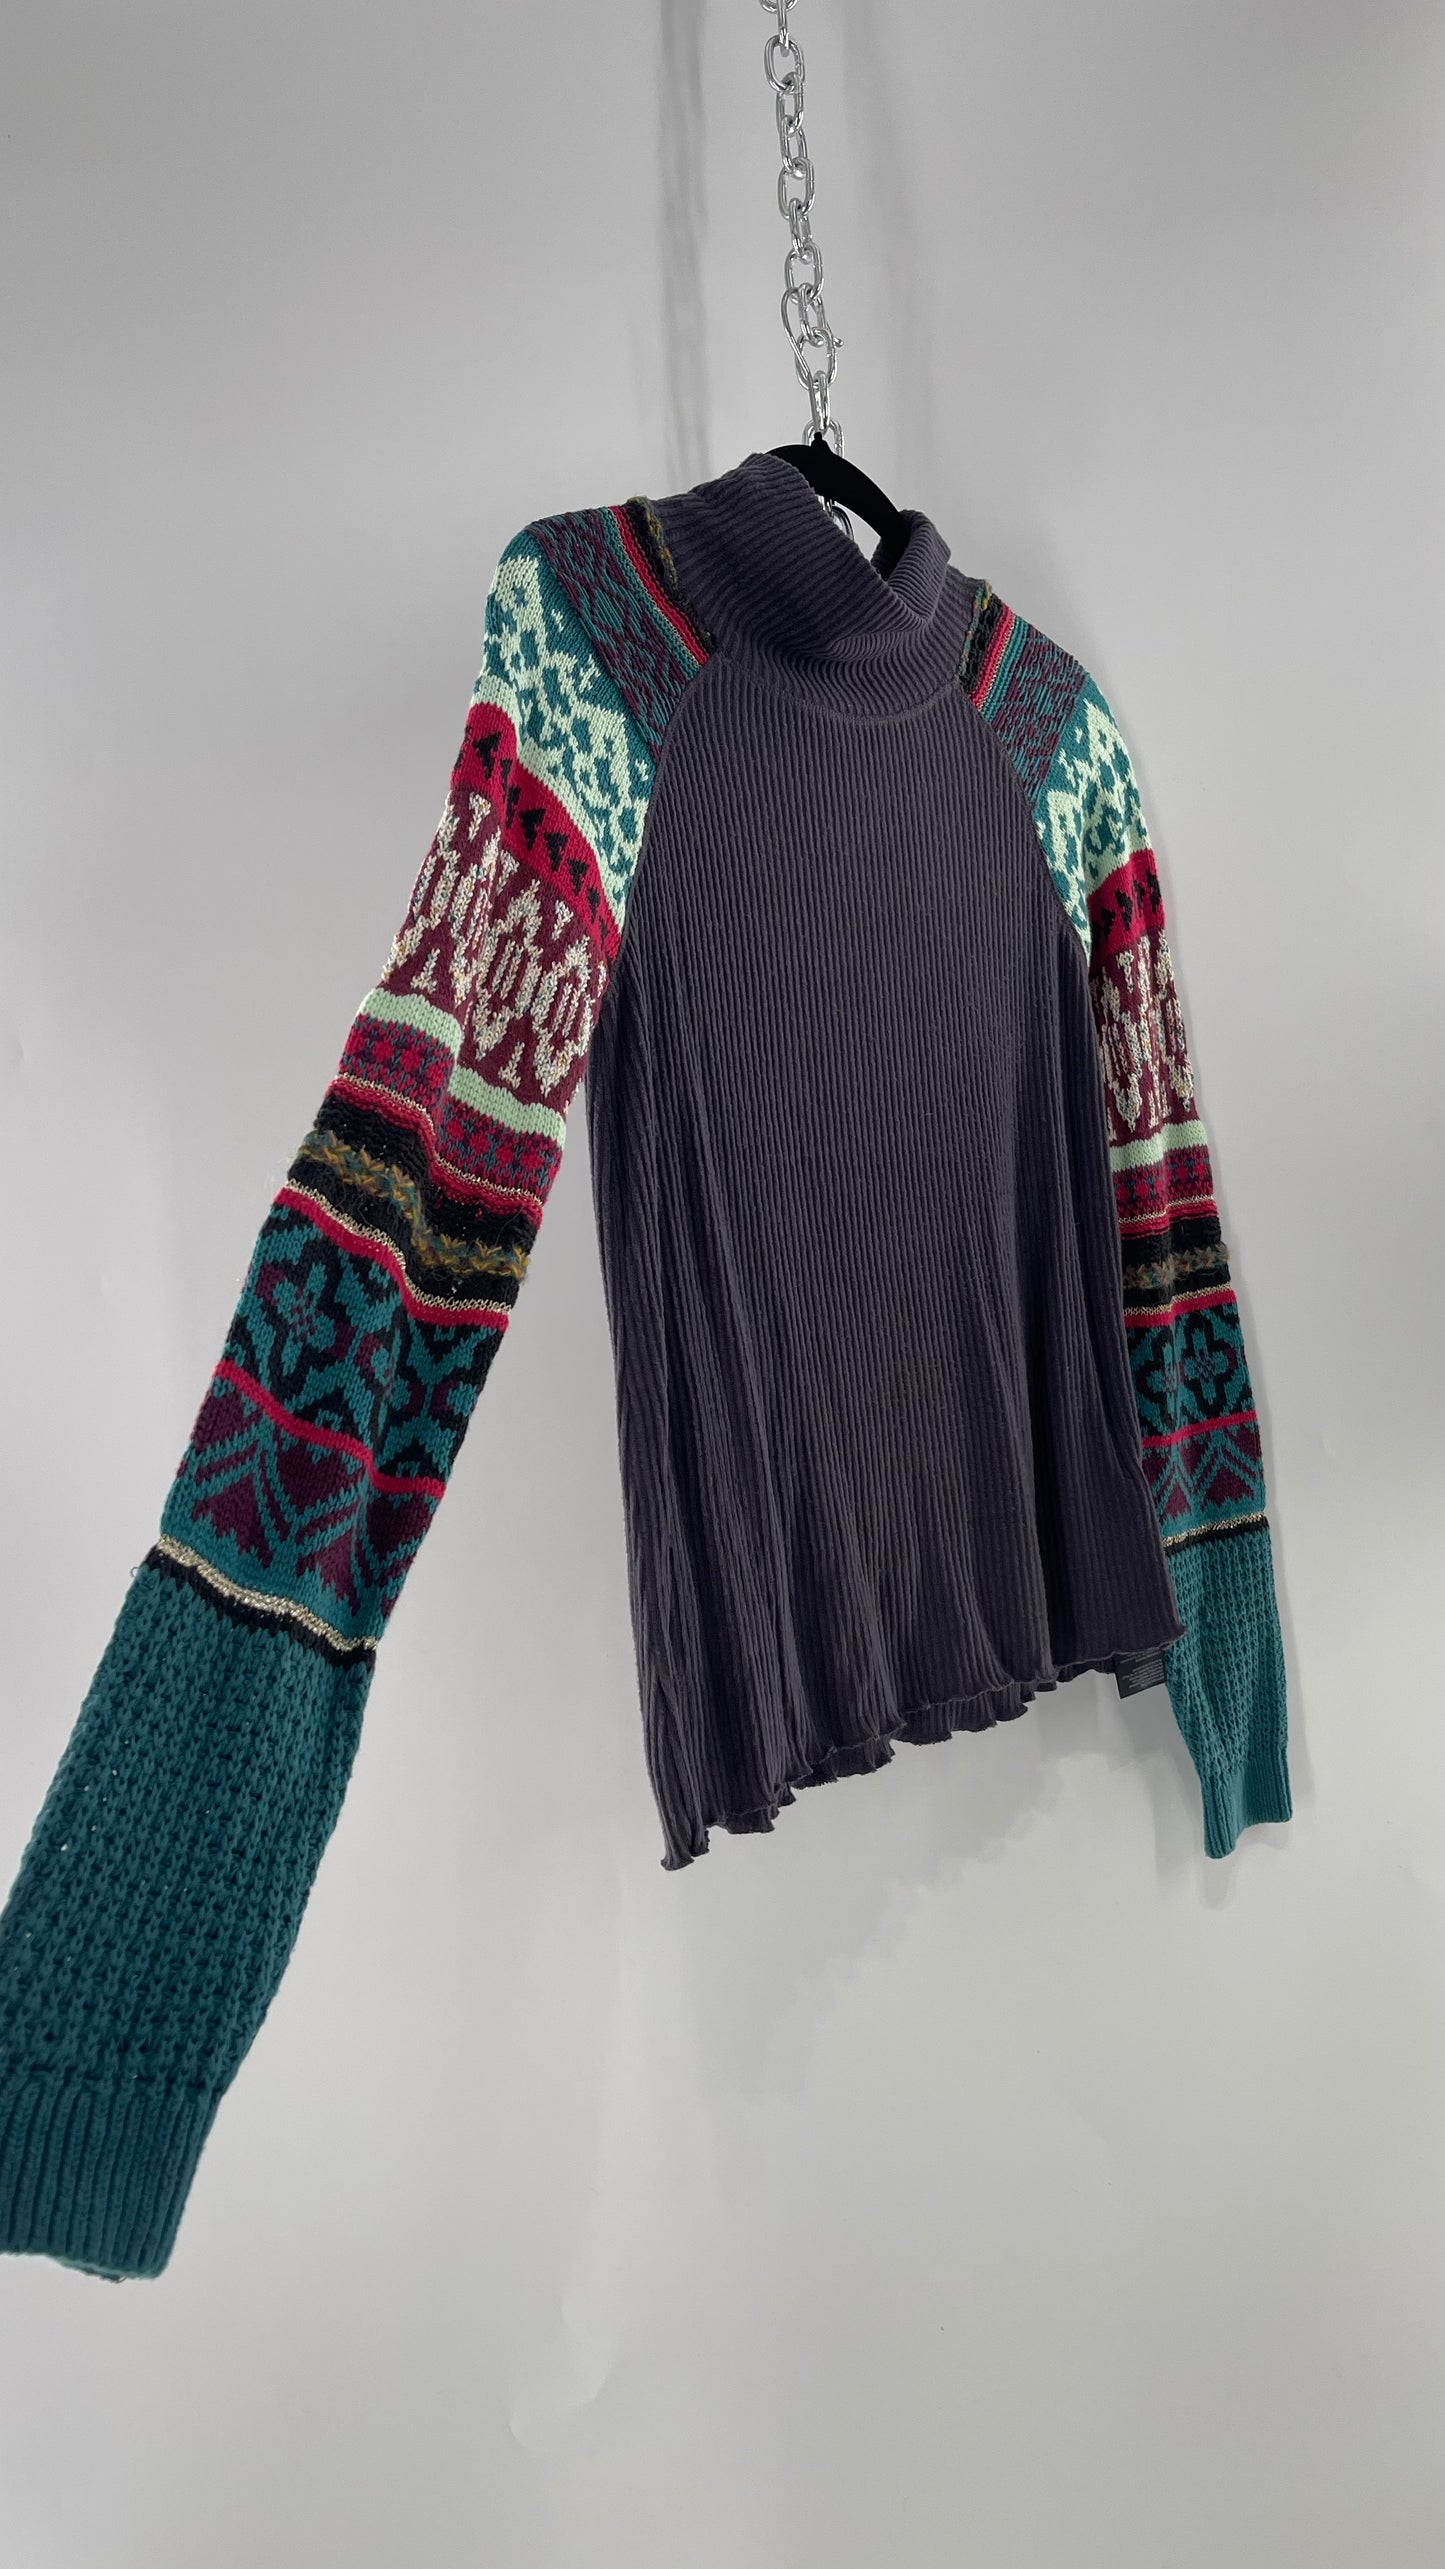 Free People Grey Cozy Knit with Colorful Patterned Knit Sleeves (Small)